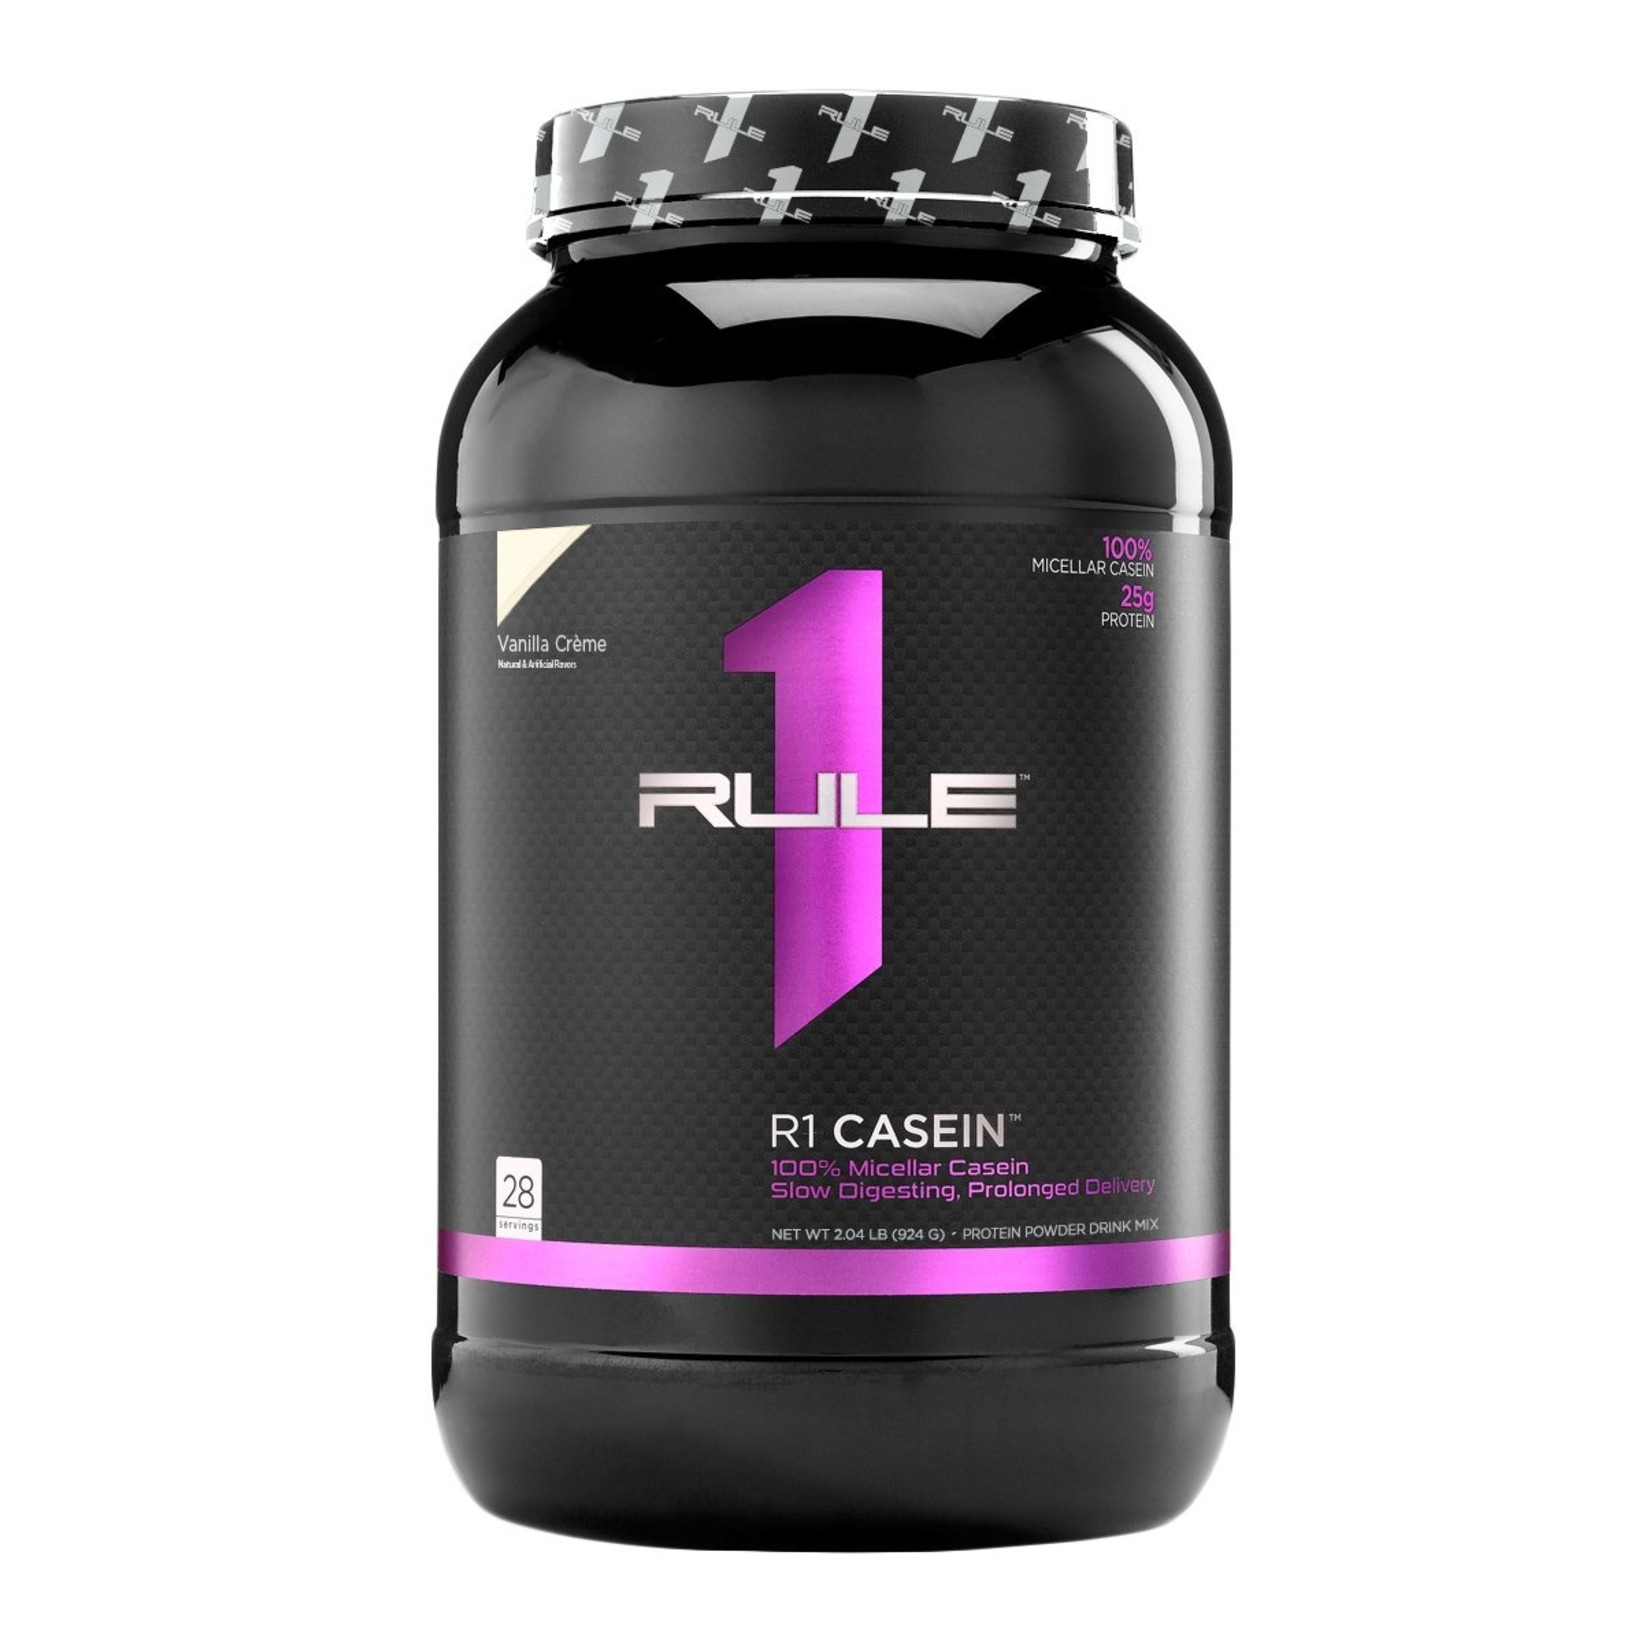 rule 1 R1 CASEIN BY RULE 1 PROTEINS